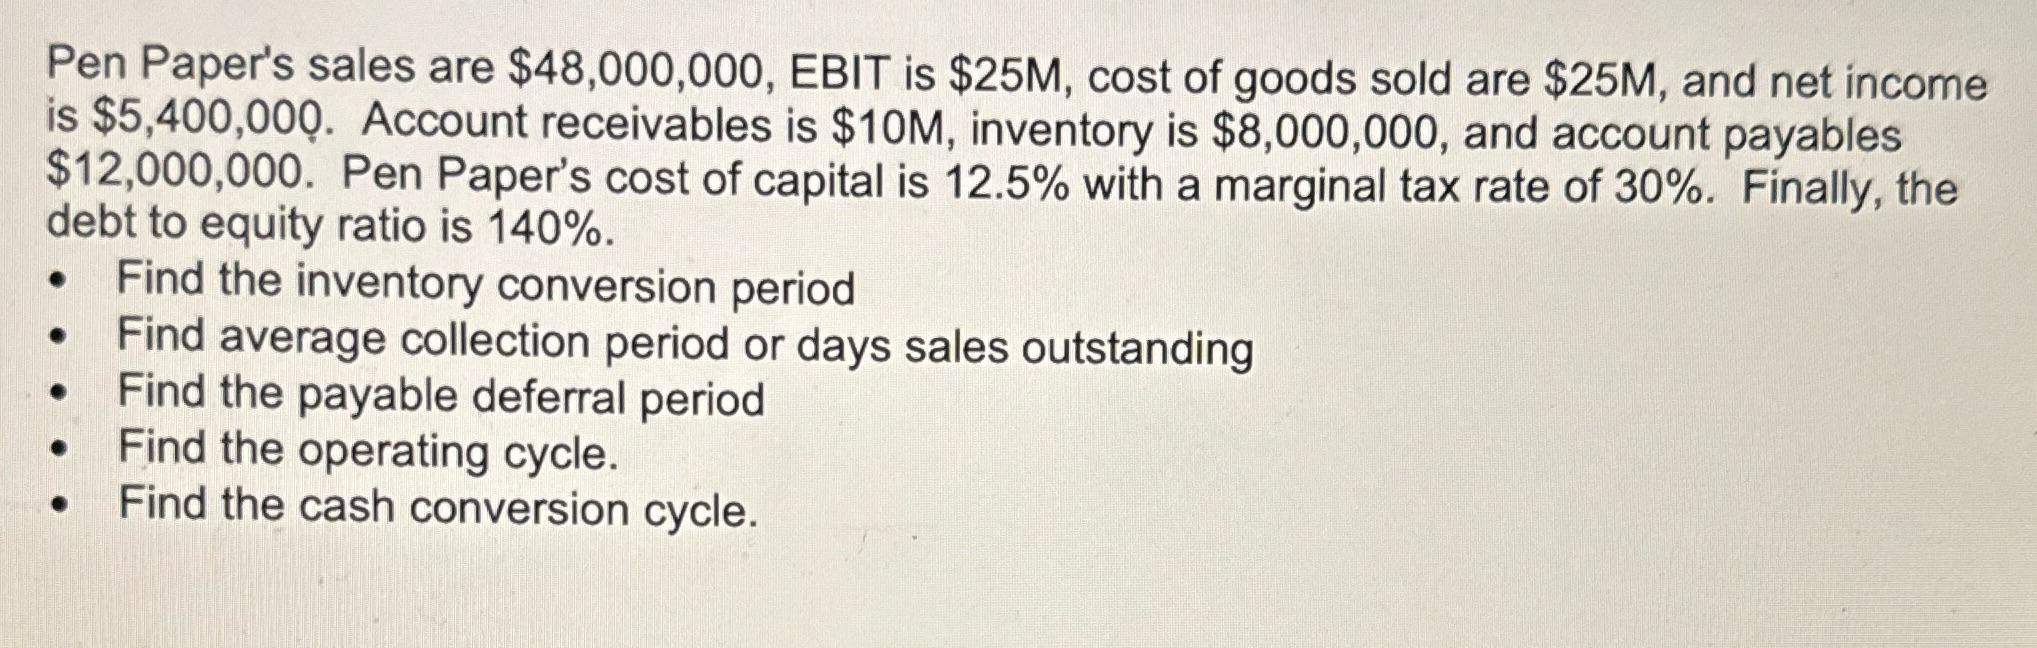 Pen Paper's sales are $48,000,000, EBIT is $25M, cost of goods sold are $25M, and net income is $5,400,000.